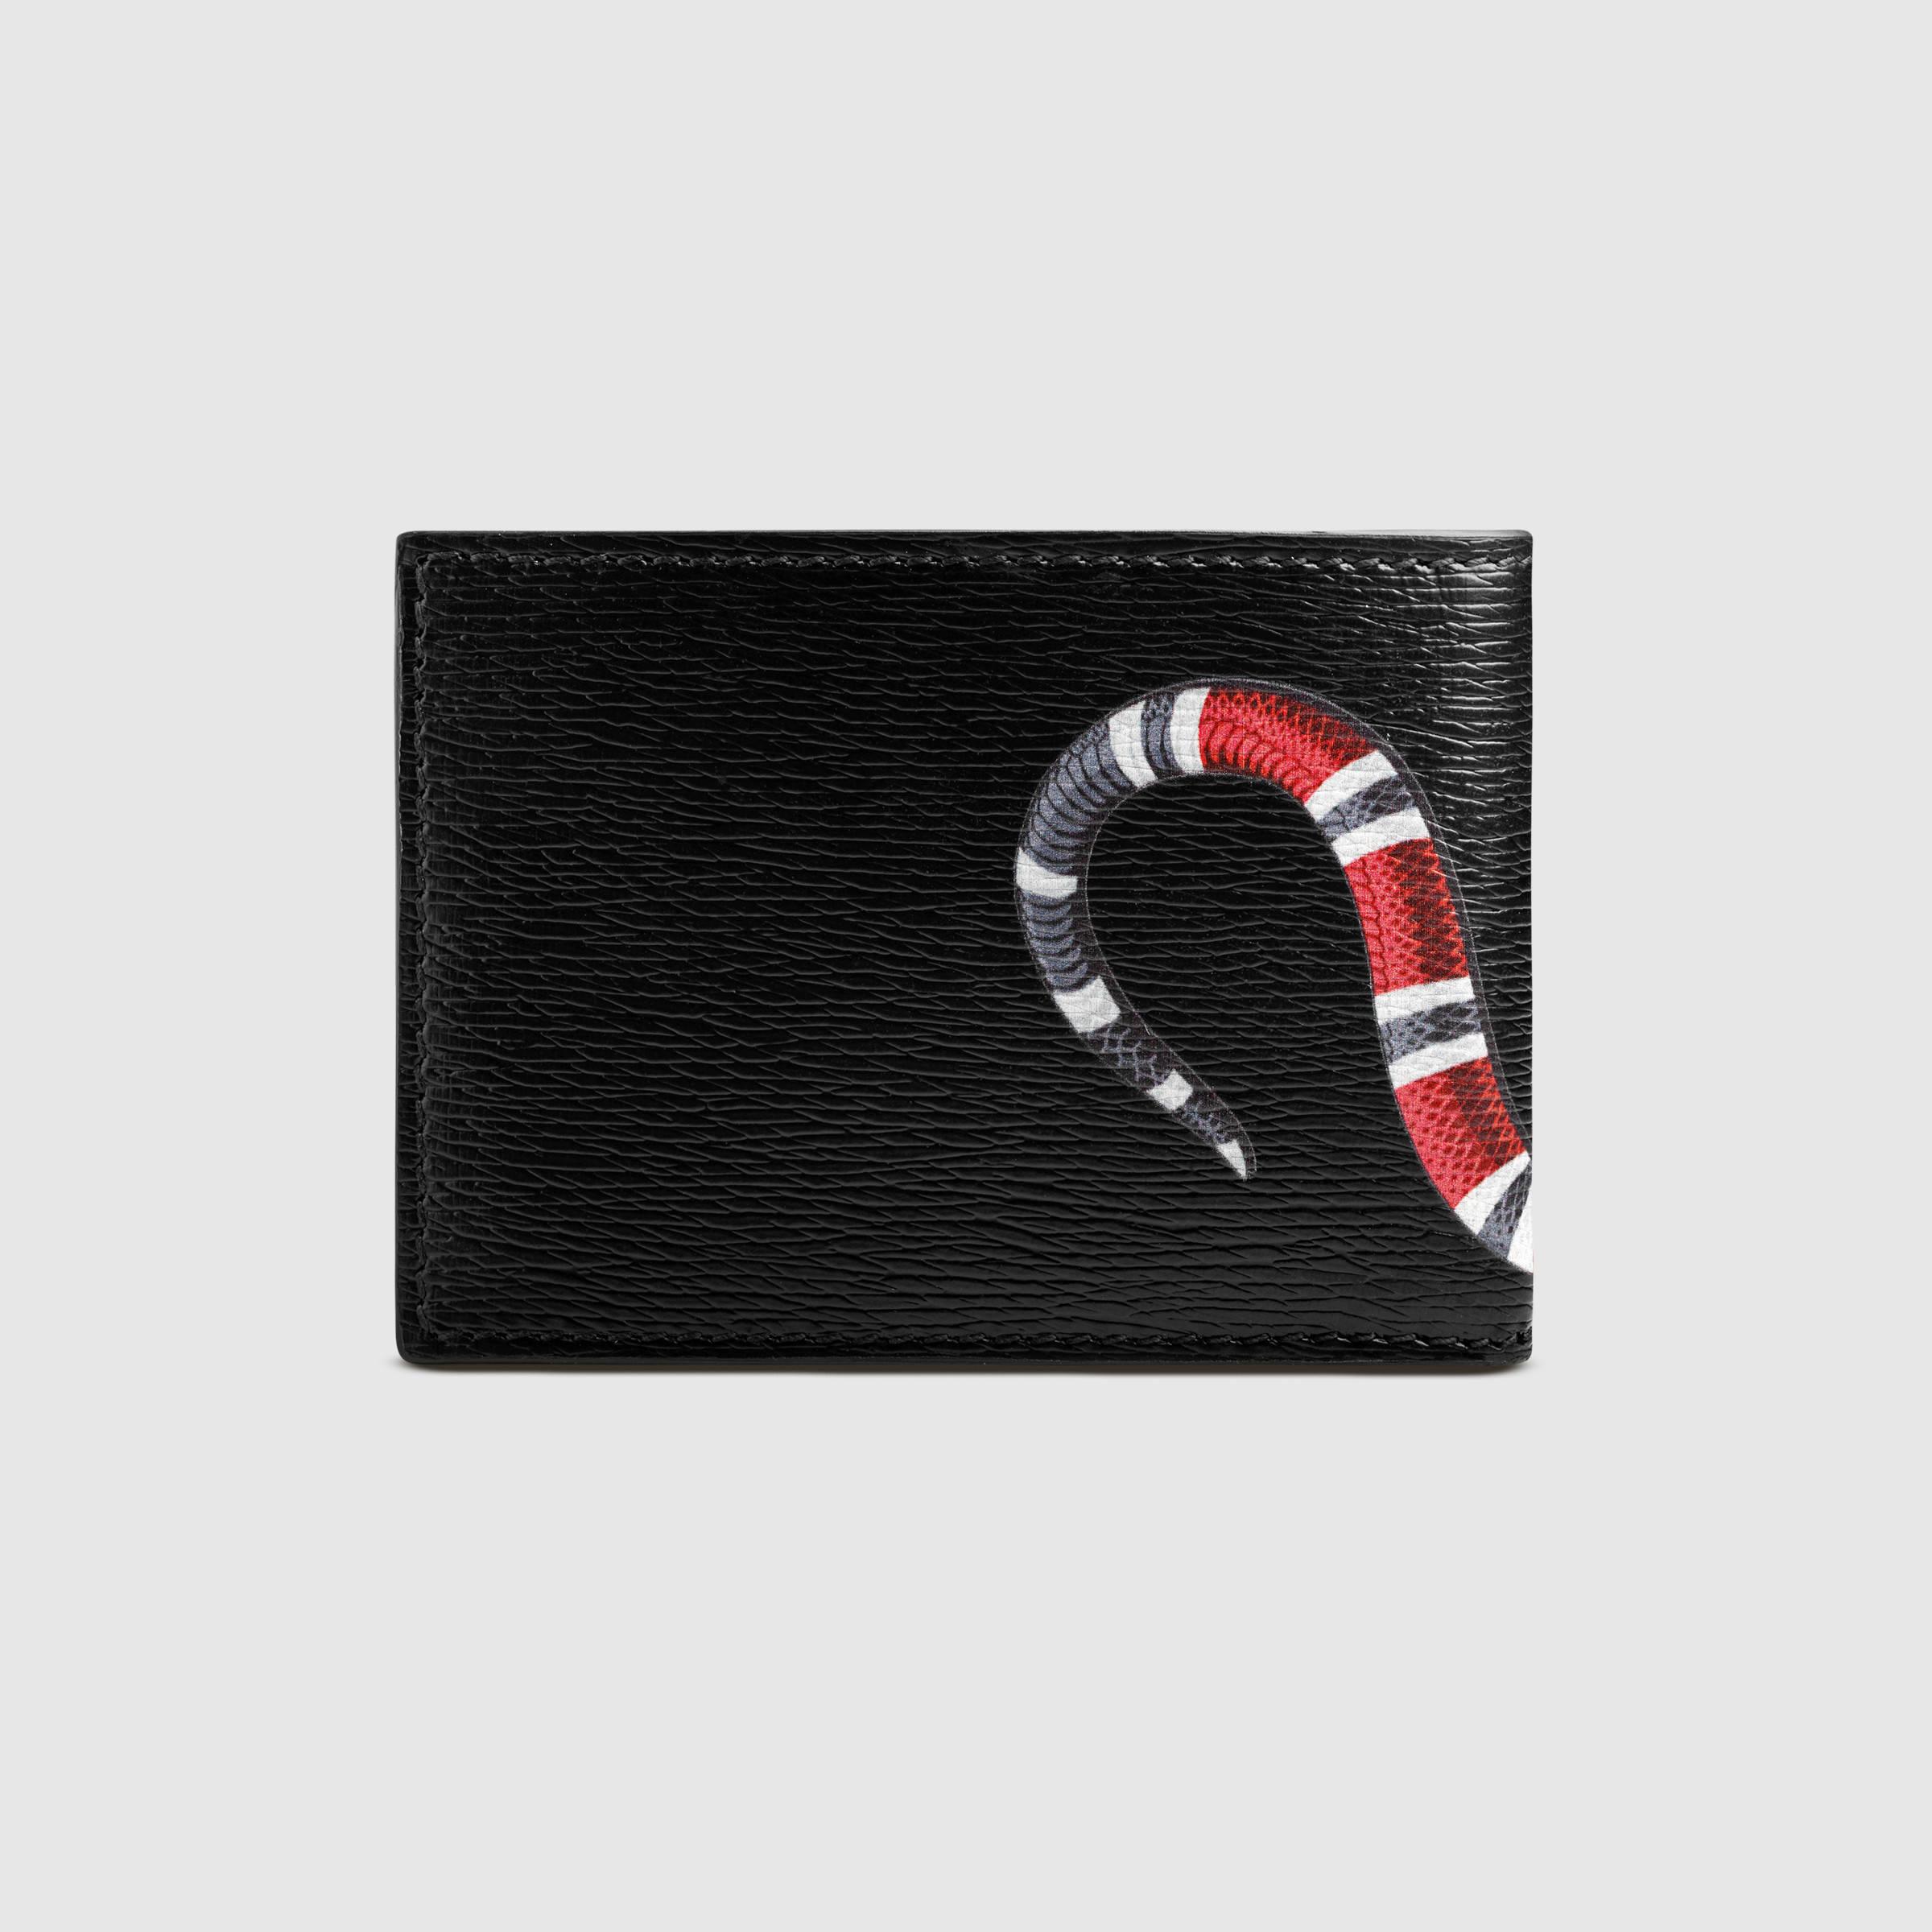 Gucci Snake Print Leather Wallet in Black for Men - Lyst